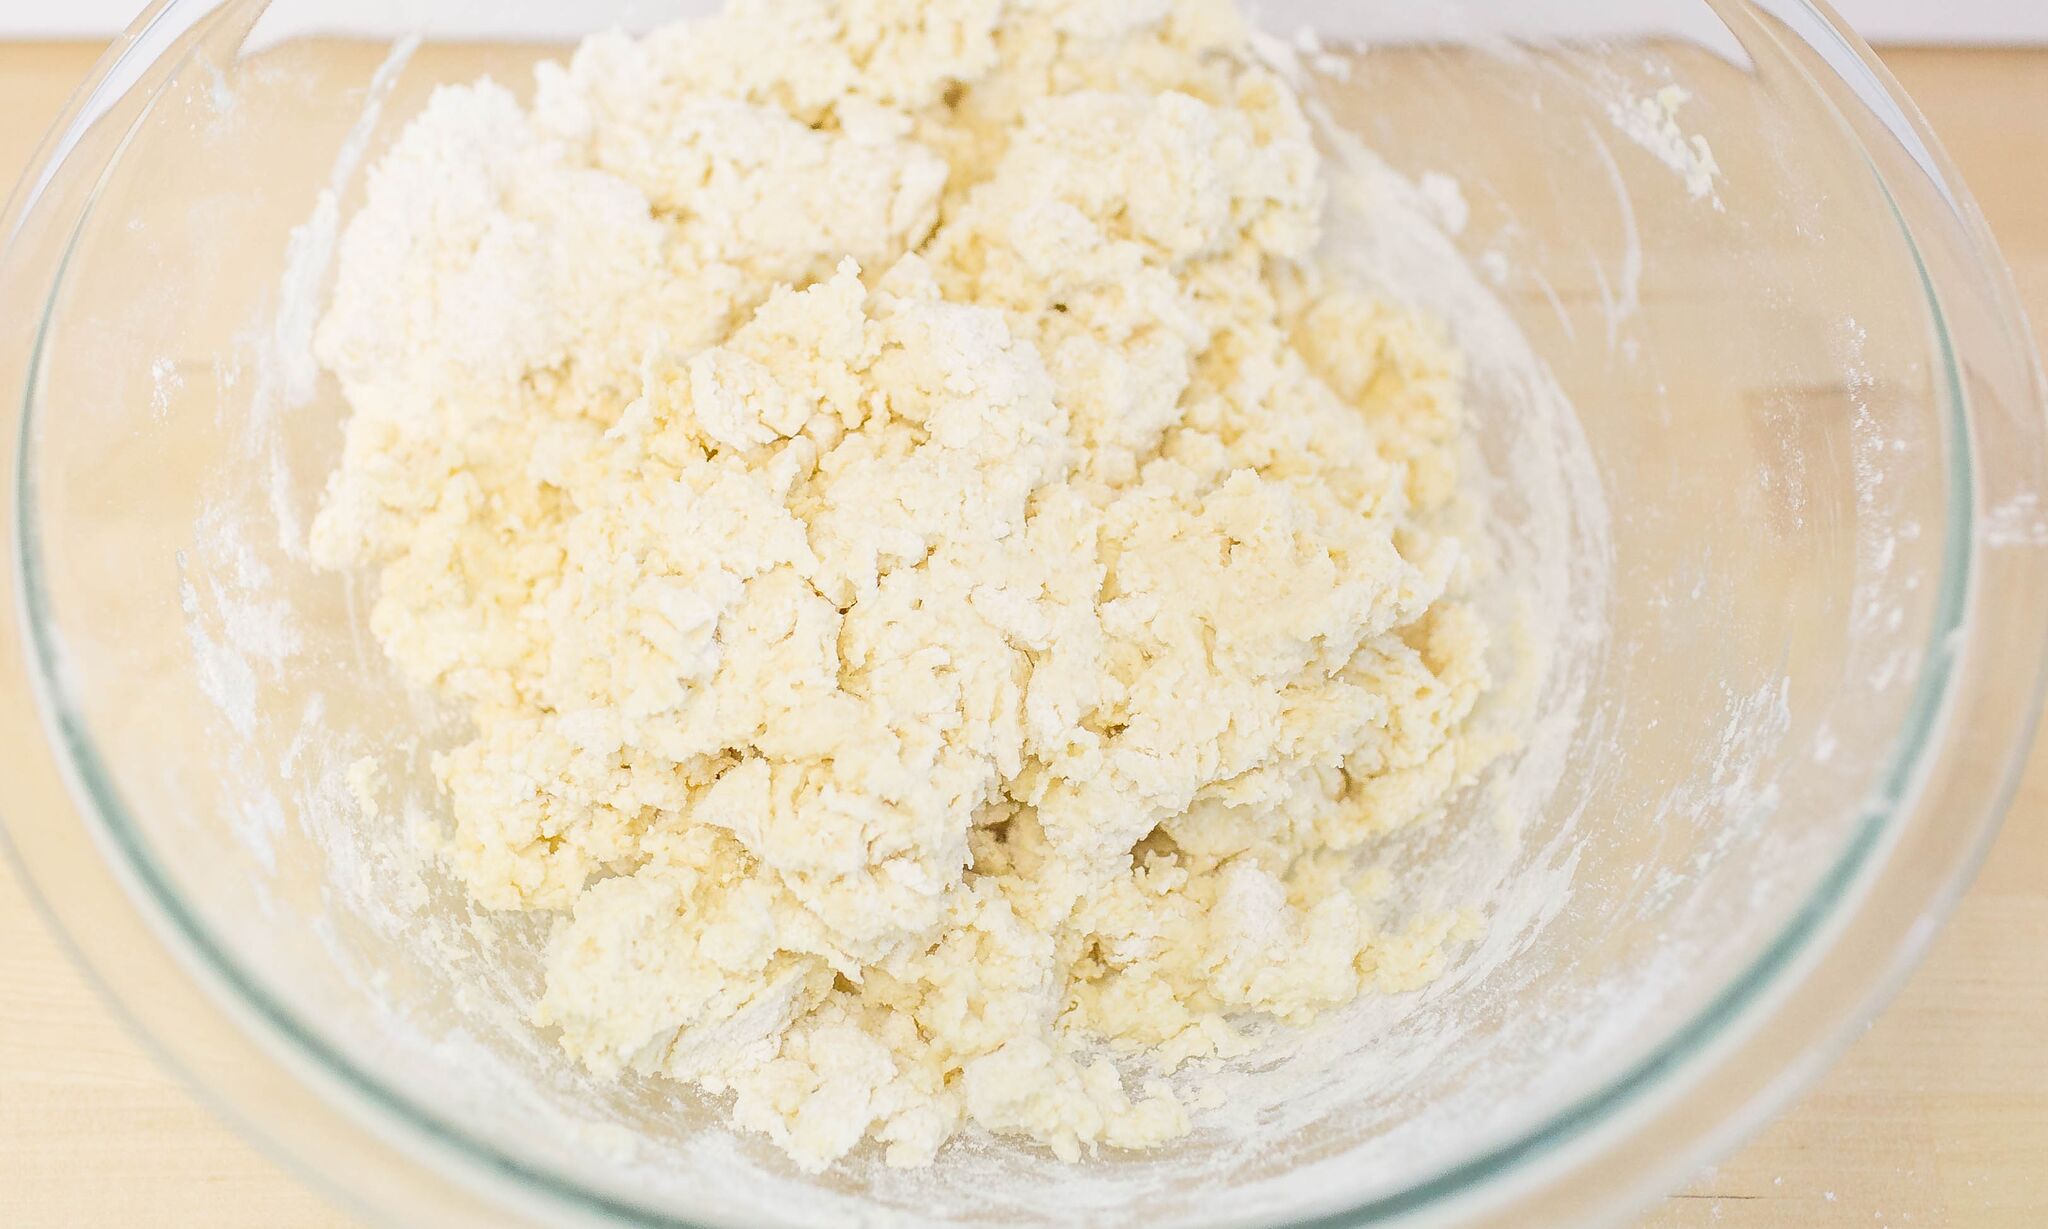 Add the buttermilk to the dry ingredients and mix together to form a dough. 